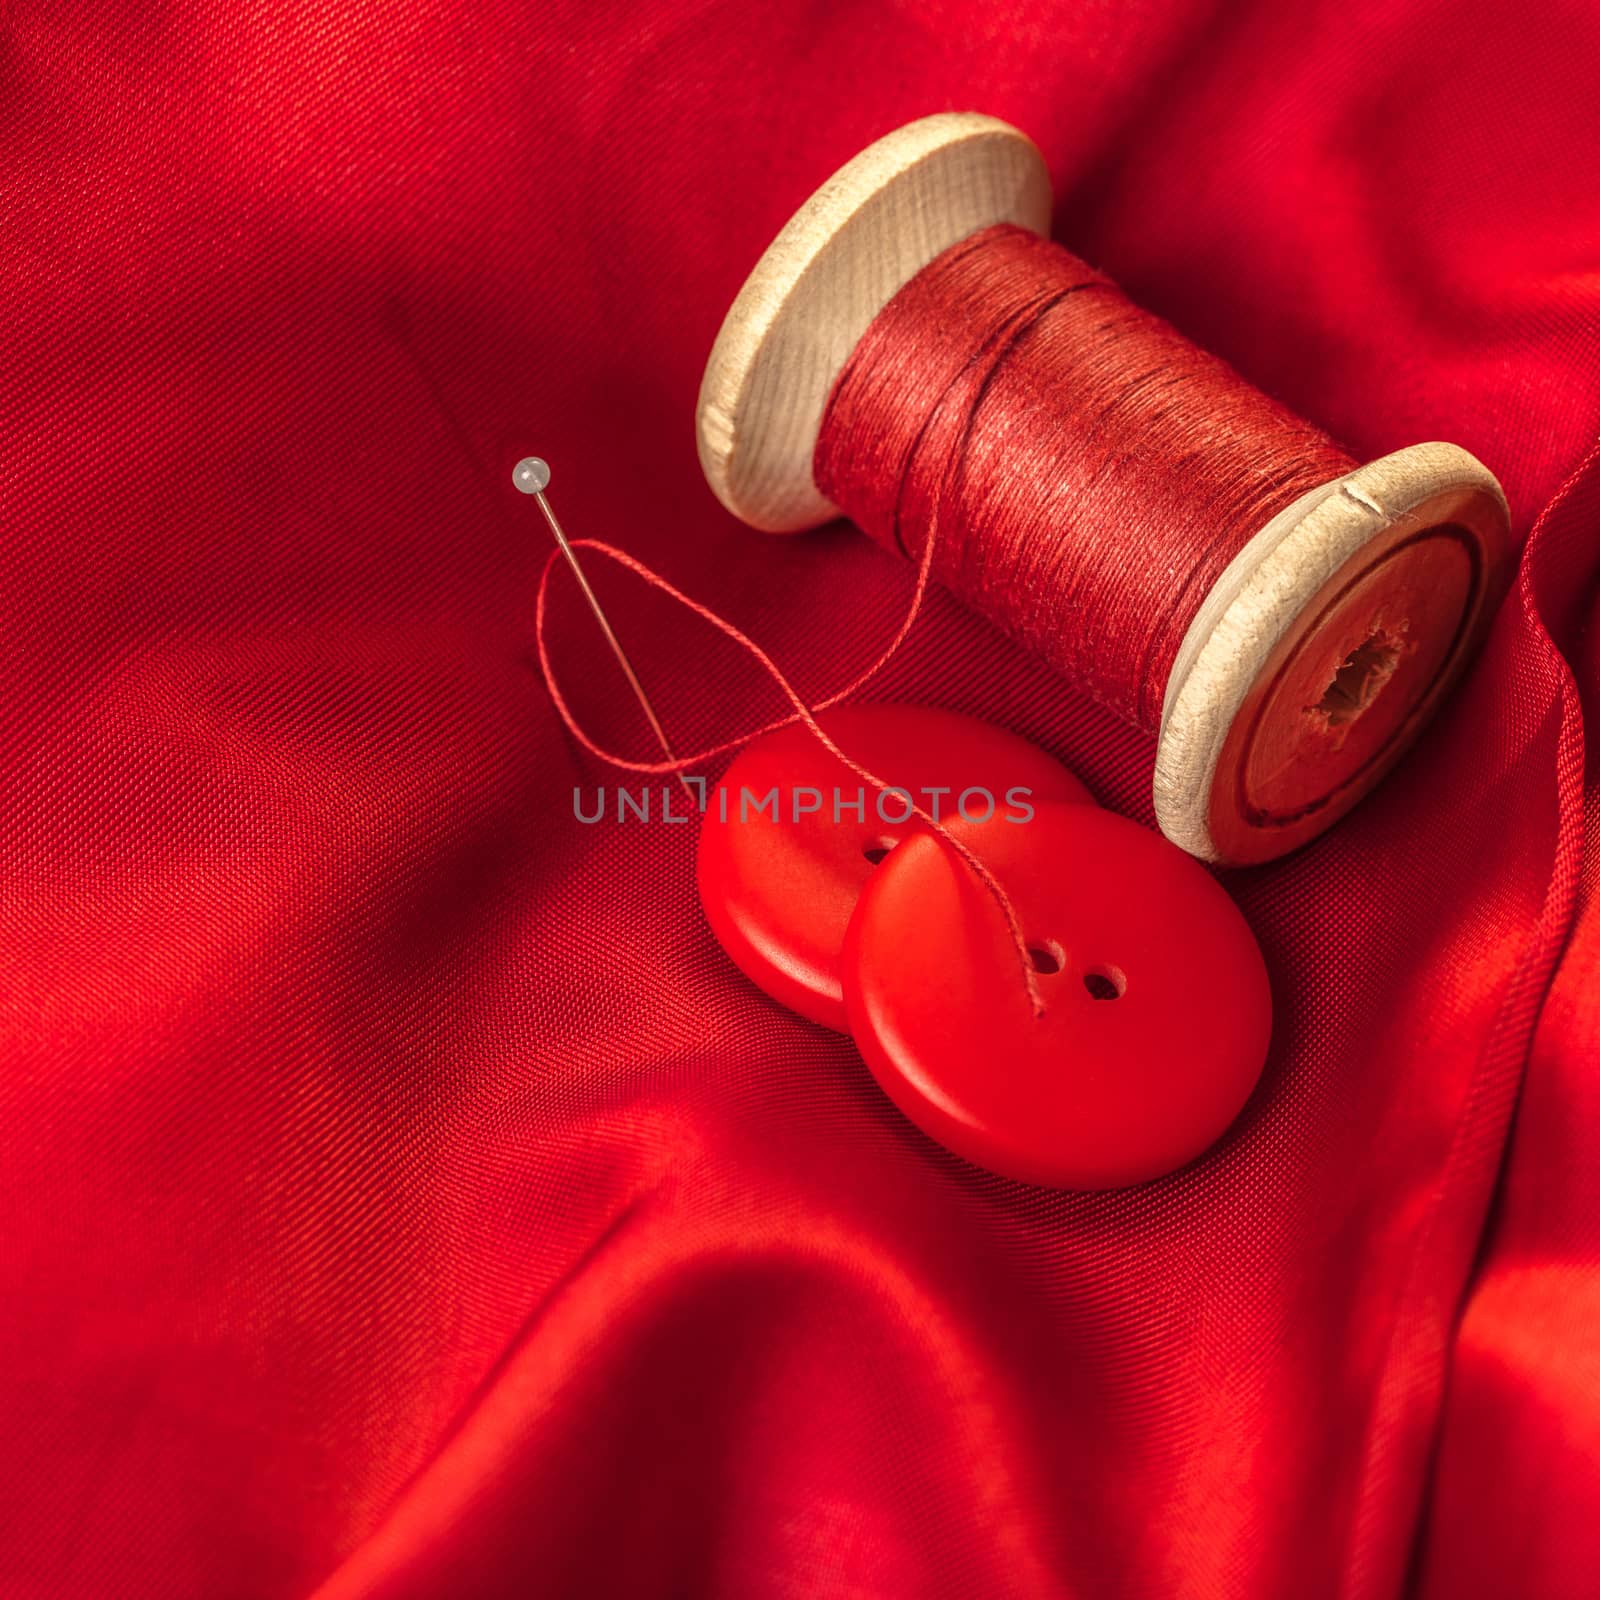 red thread with buttons on the background of lining fabric